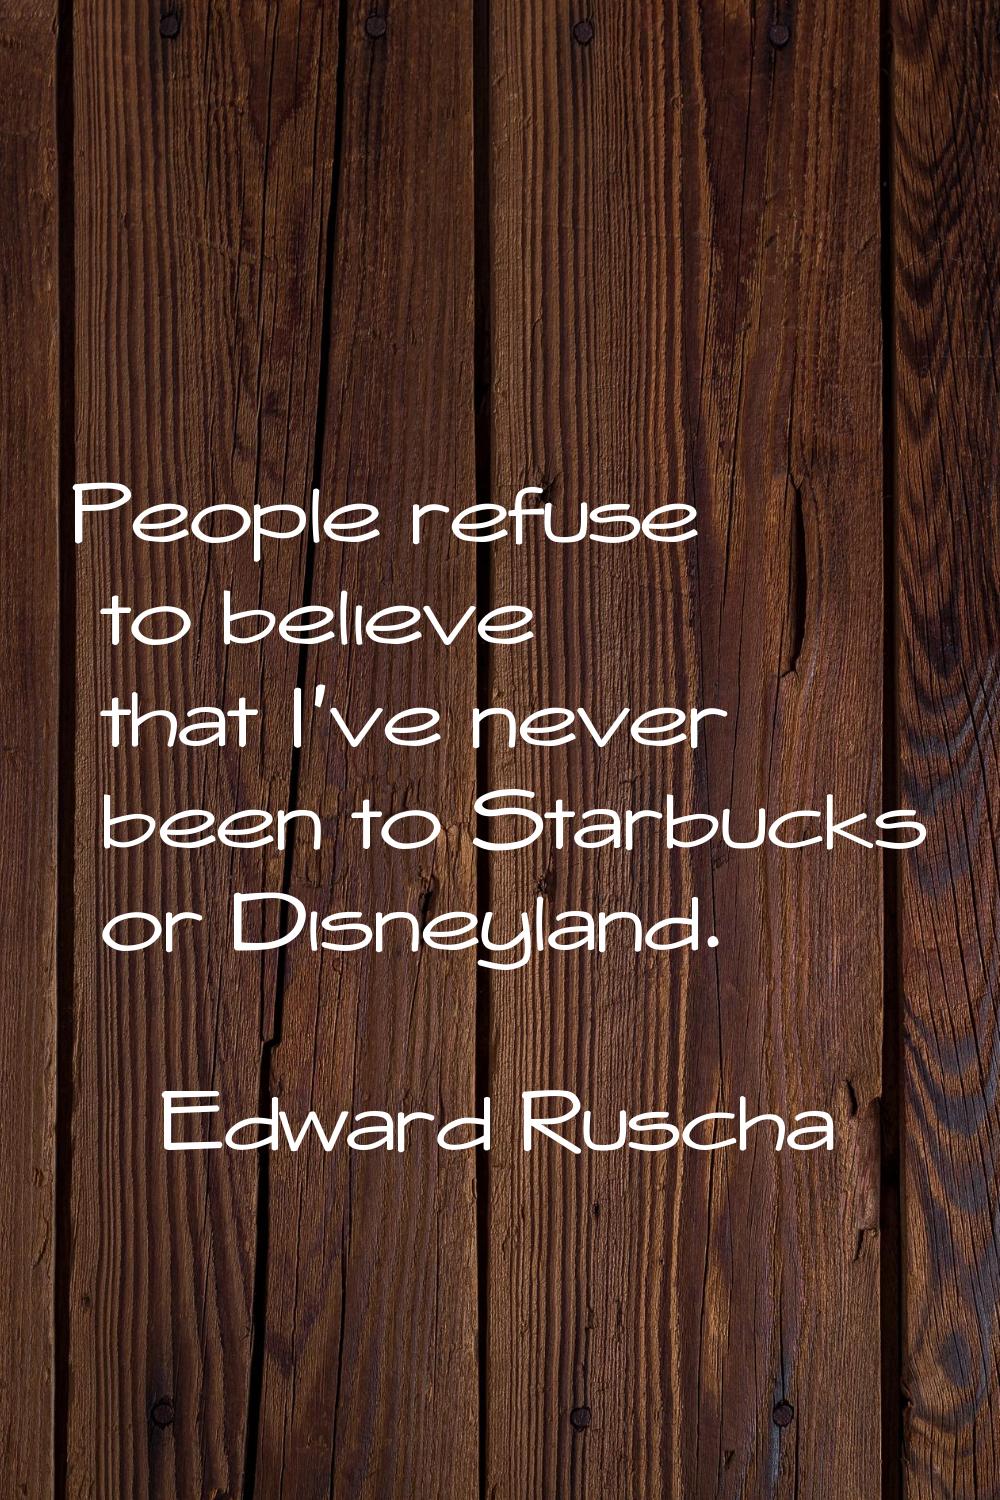 People refuse to believe that I've never been to Starbucks or Disneyland.